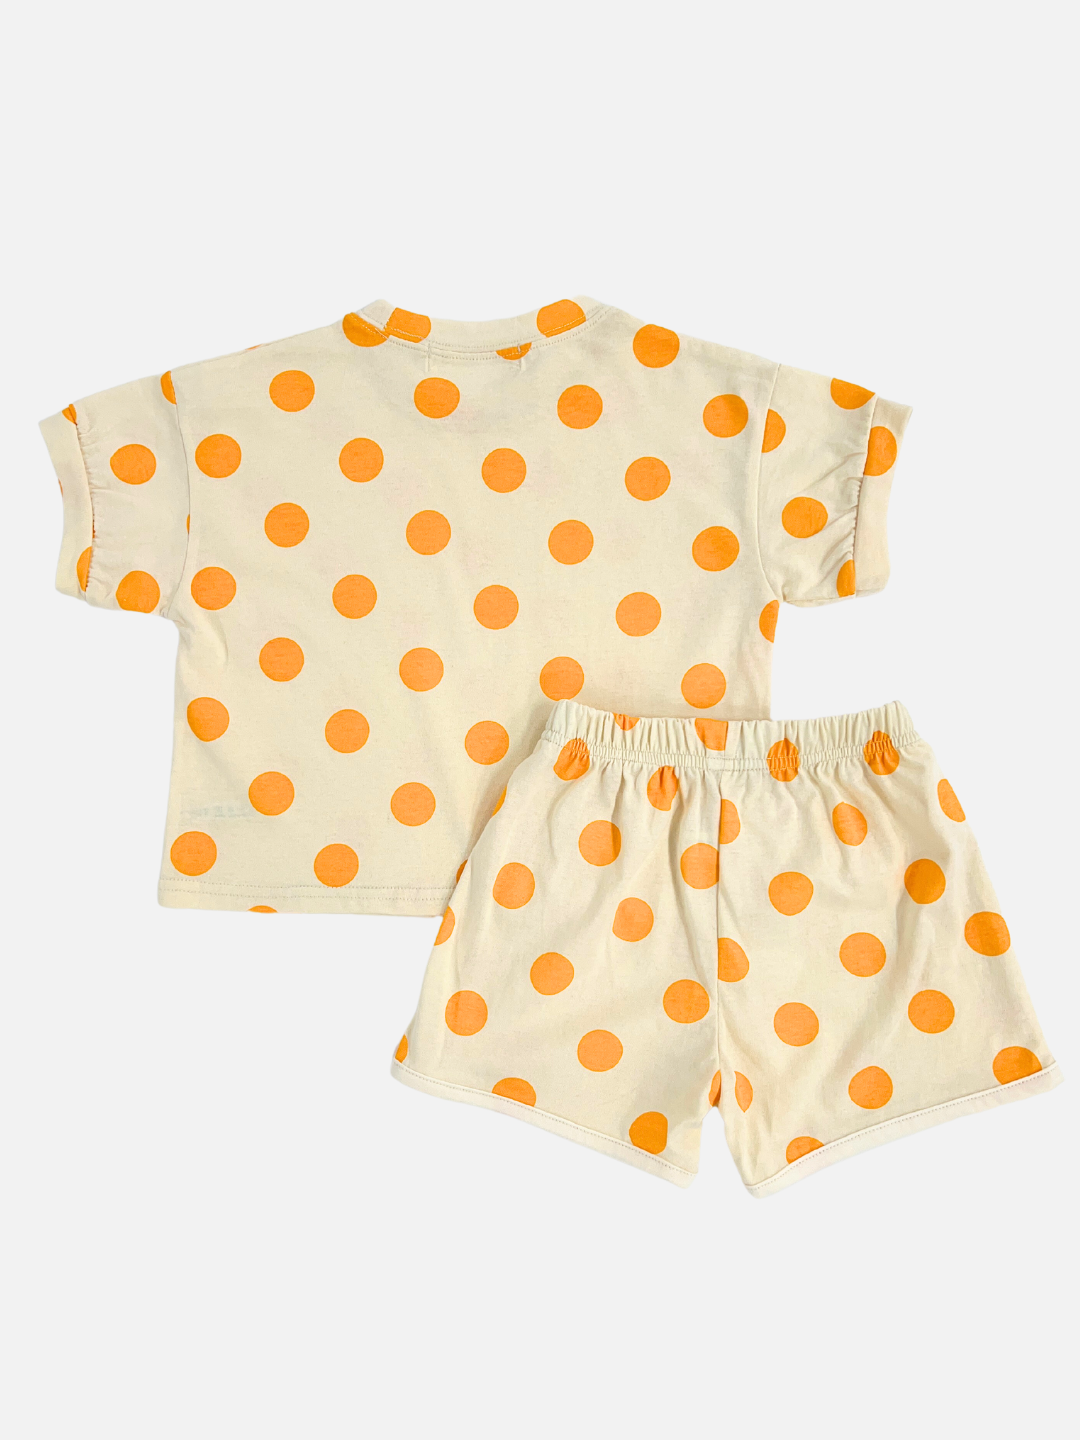 Orange | A kids' tee shirt and shorts set in a pattern of orange dots on an ecru background, back view